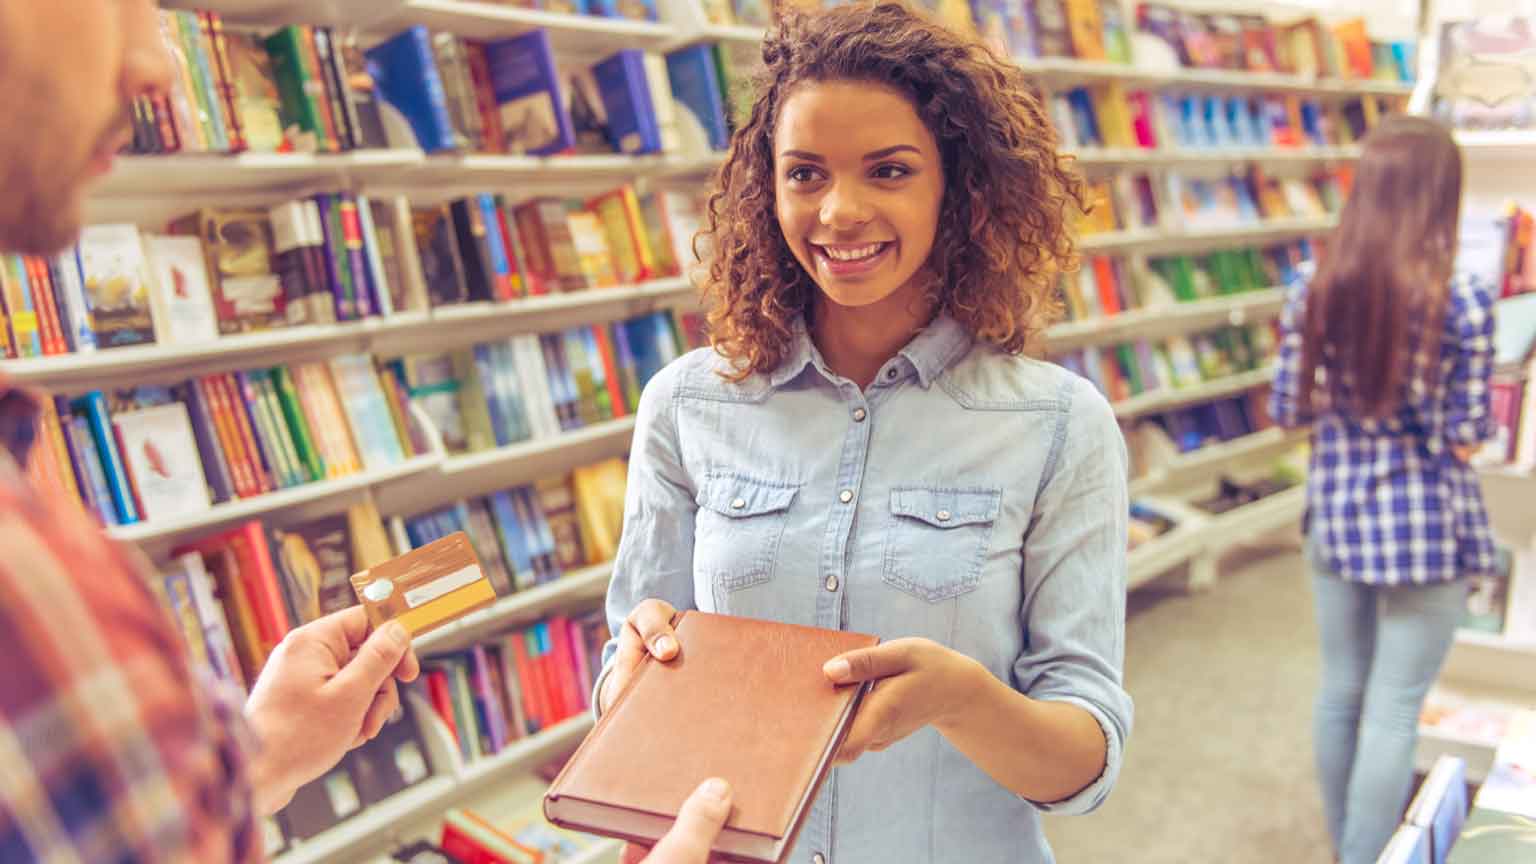 student buying book at the bookshop using a credit card